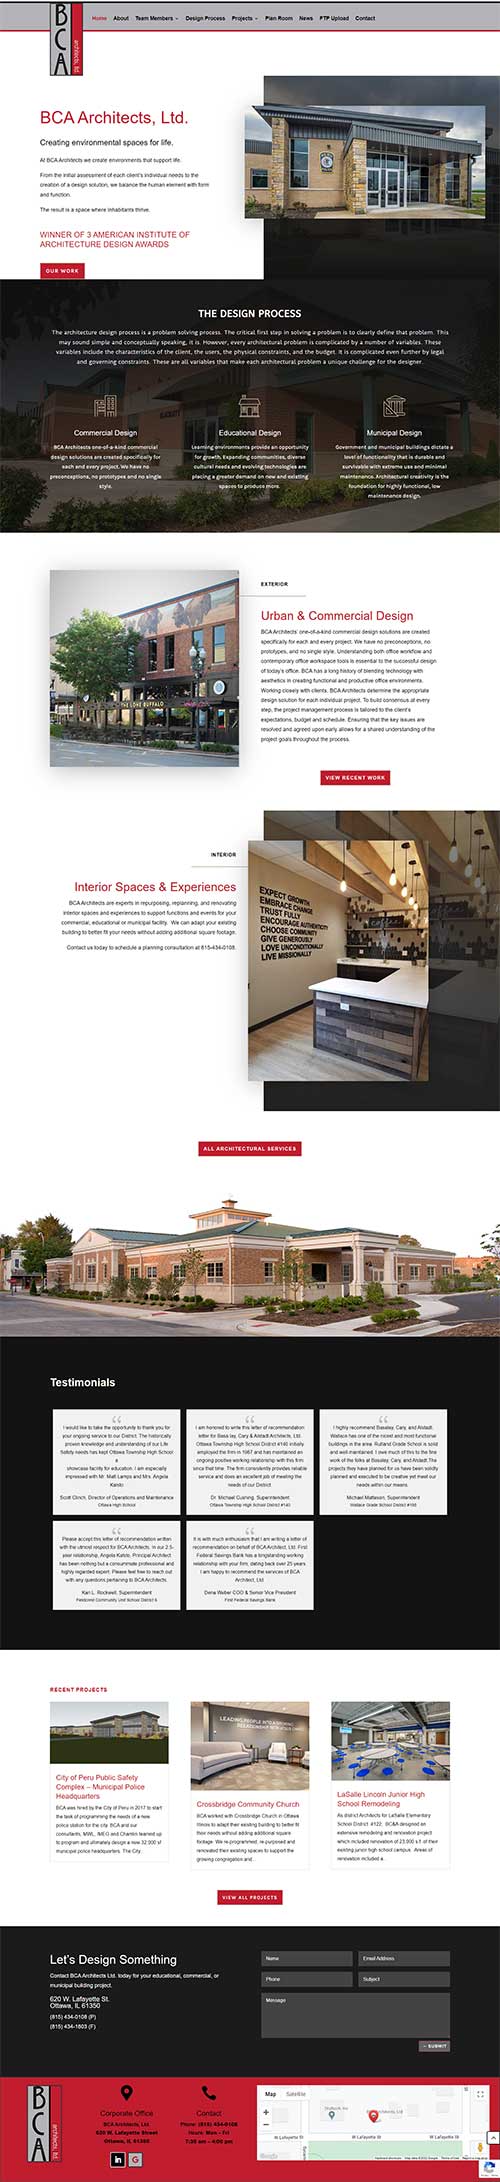 Website Redesign for BCA Architects, Ltd. by Connecting Point Computer Center